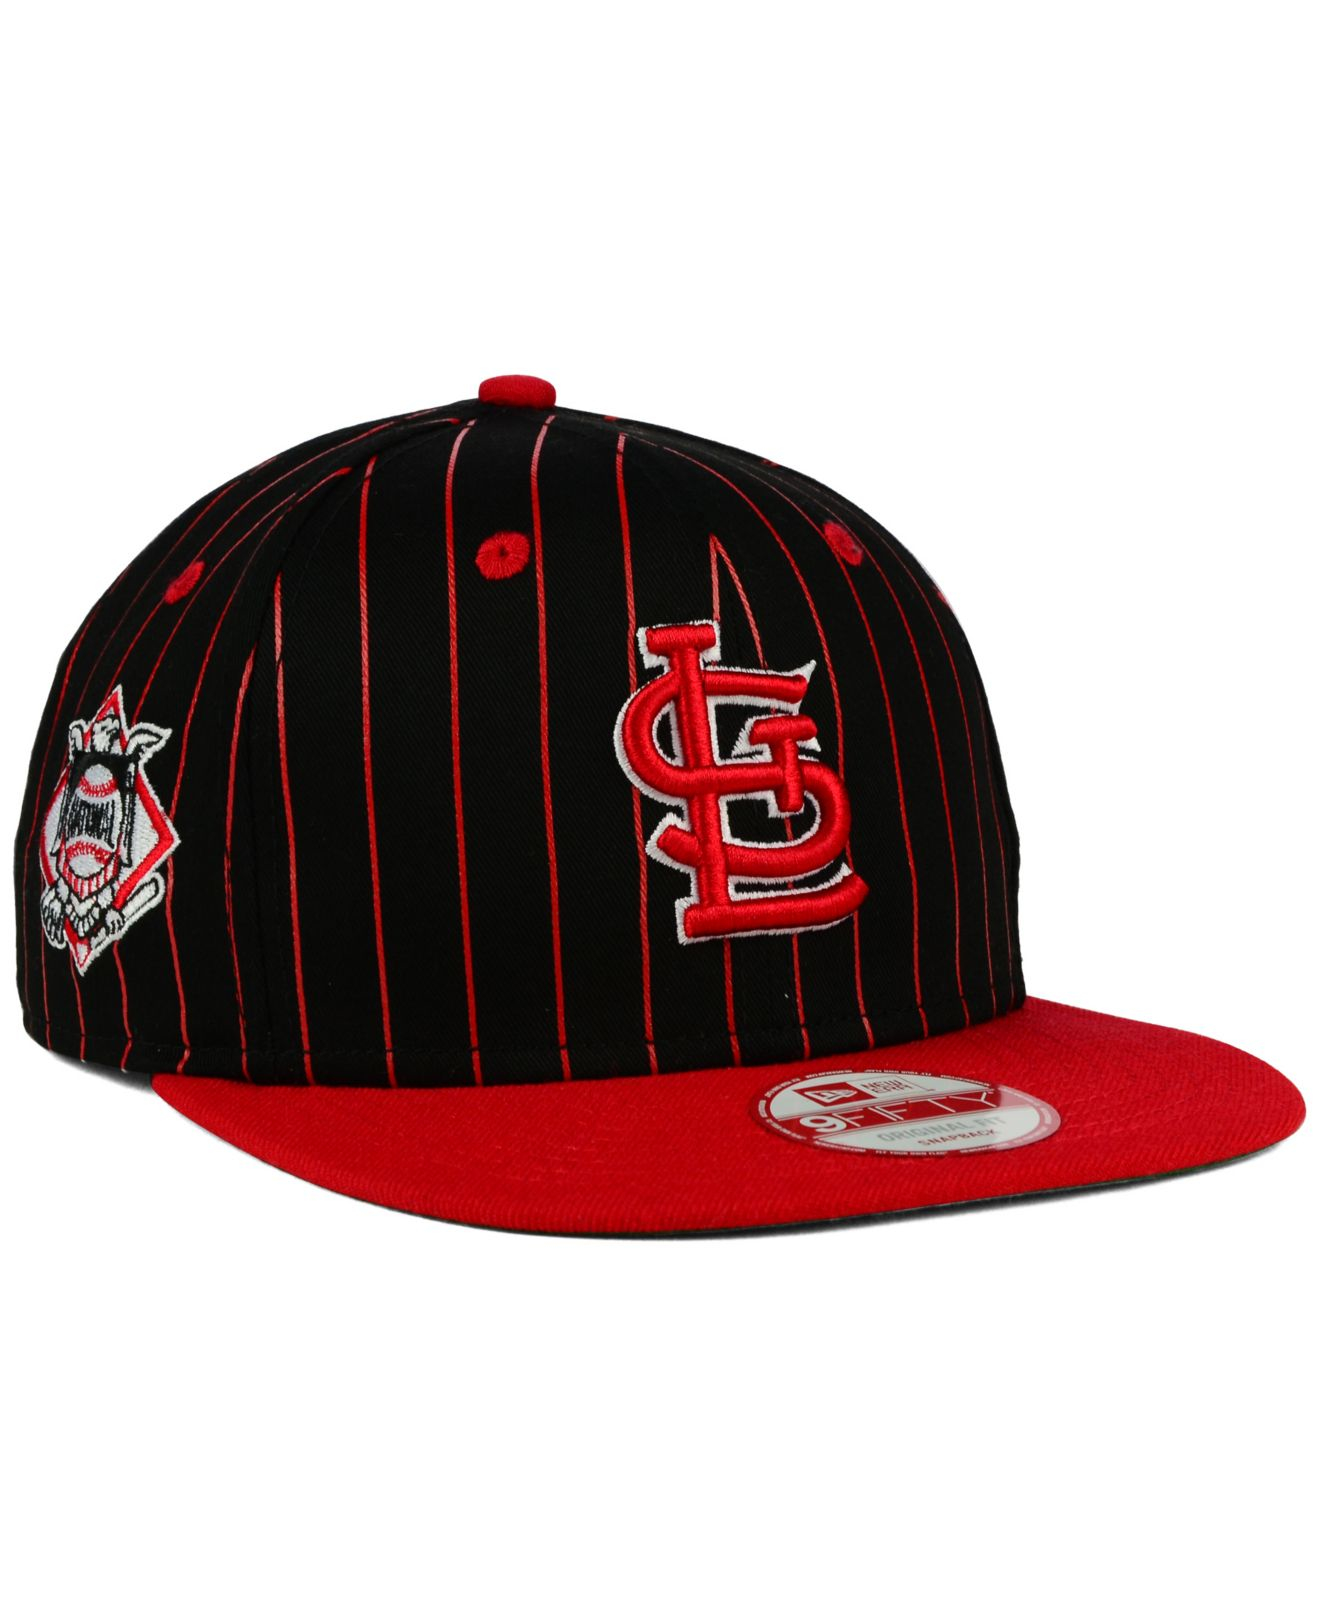 St. Louis Cardinals Satin Script 9FIFTY Snapback Hat, Red, MLB by New Era